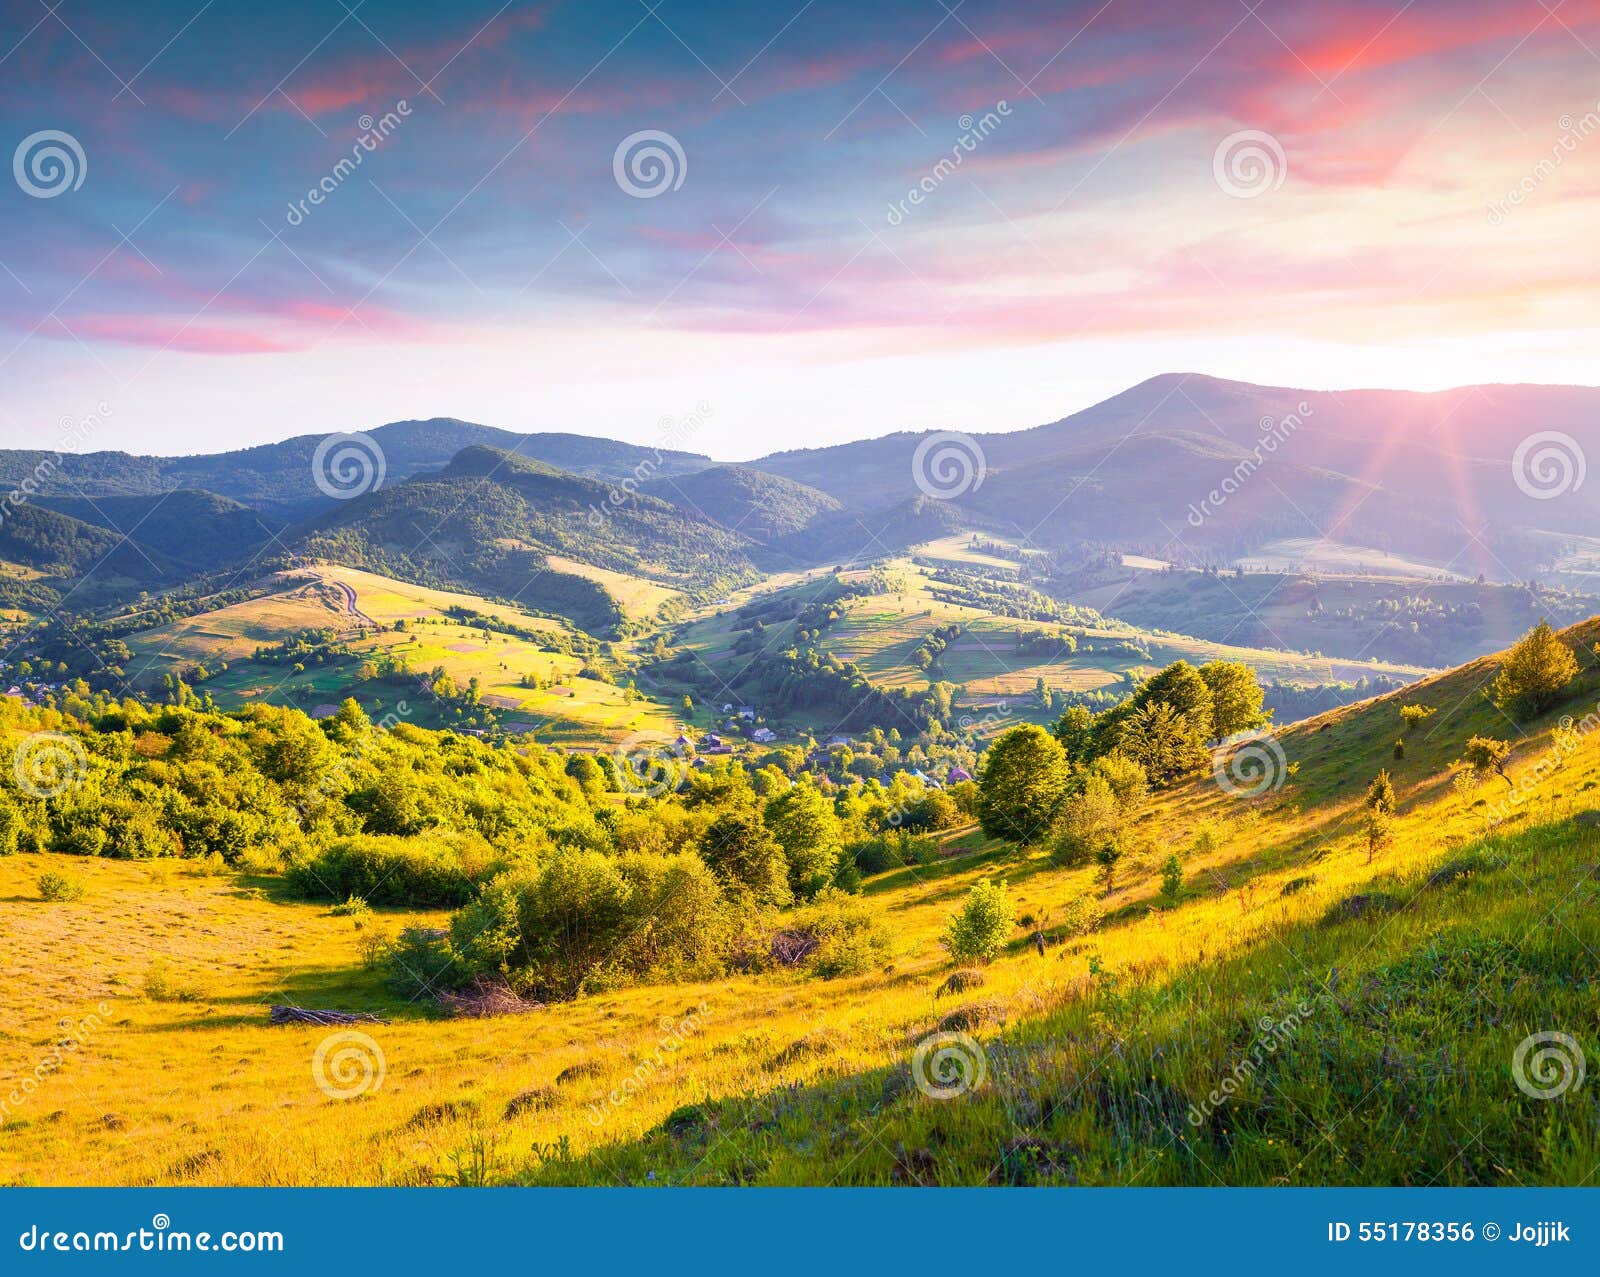 Colorful Summer Sunrise In The Carpathian Mountains Stock Photo Image